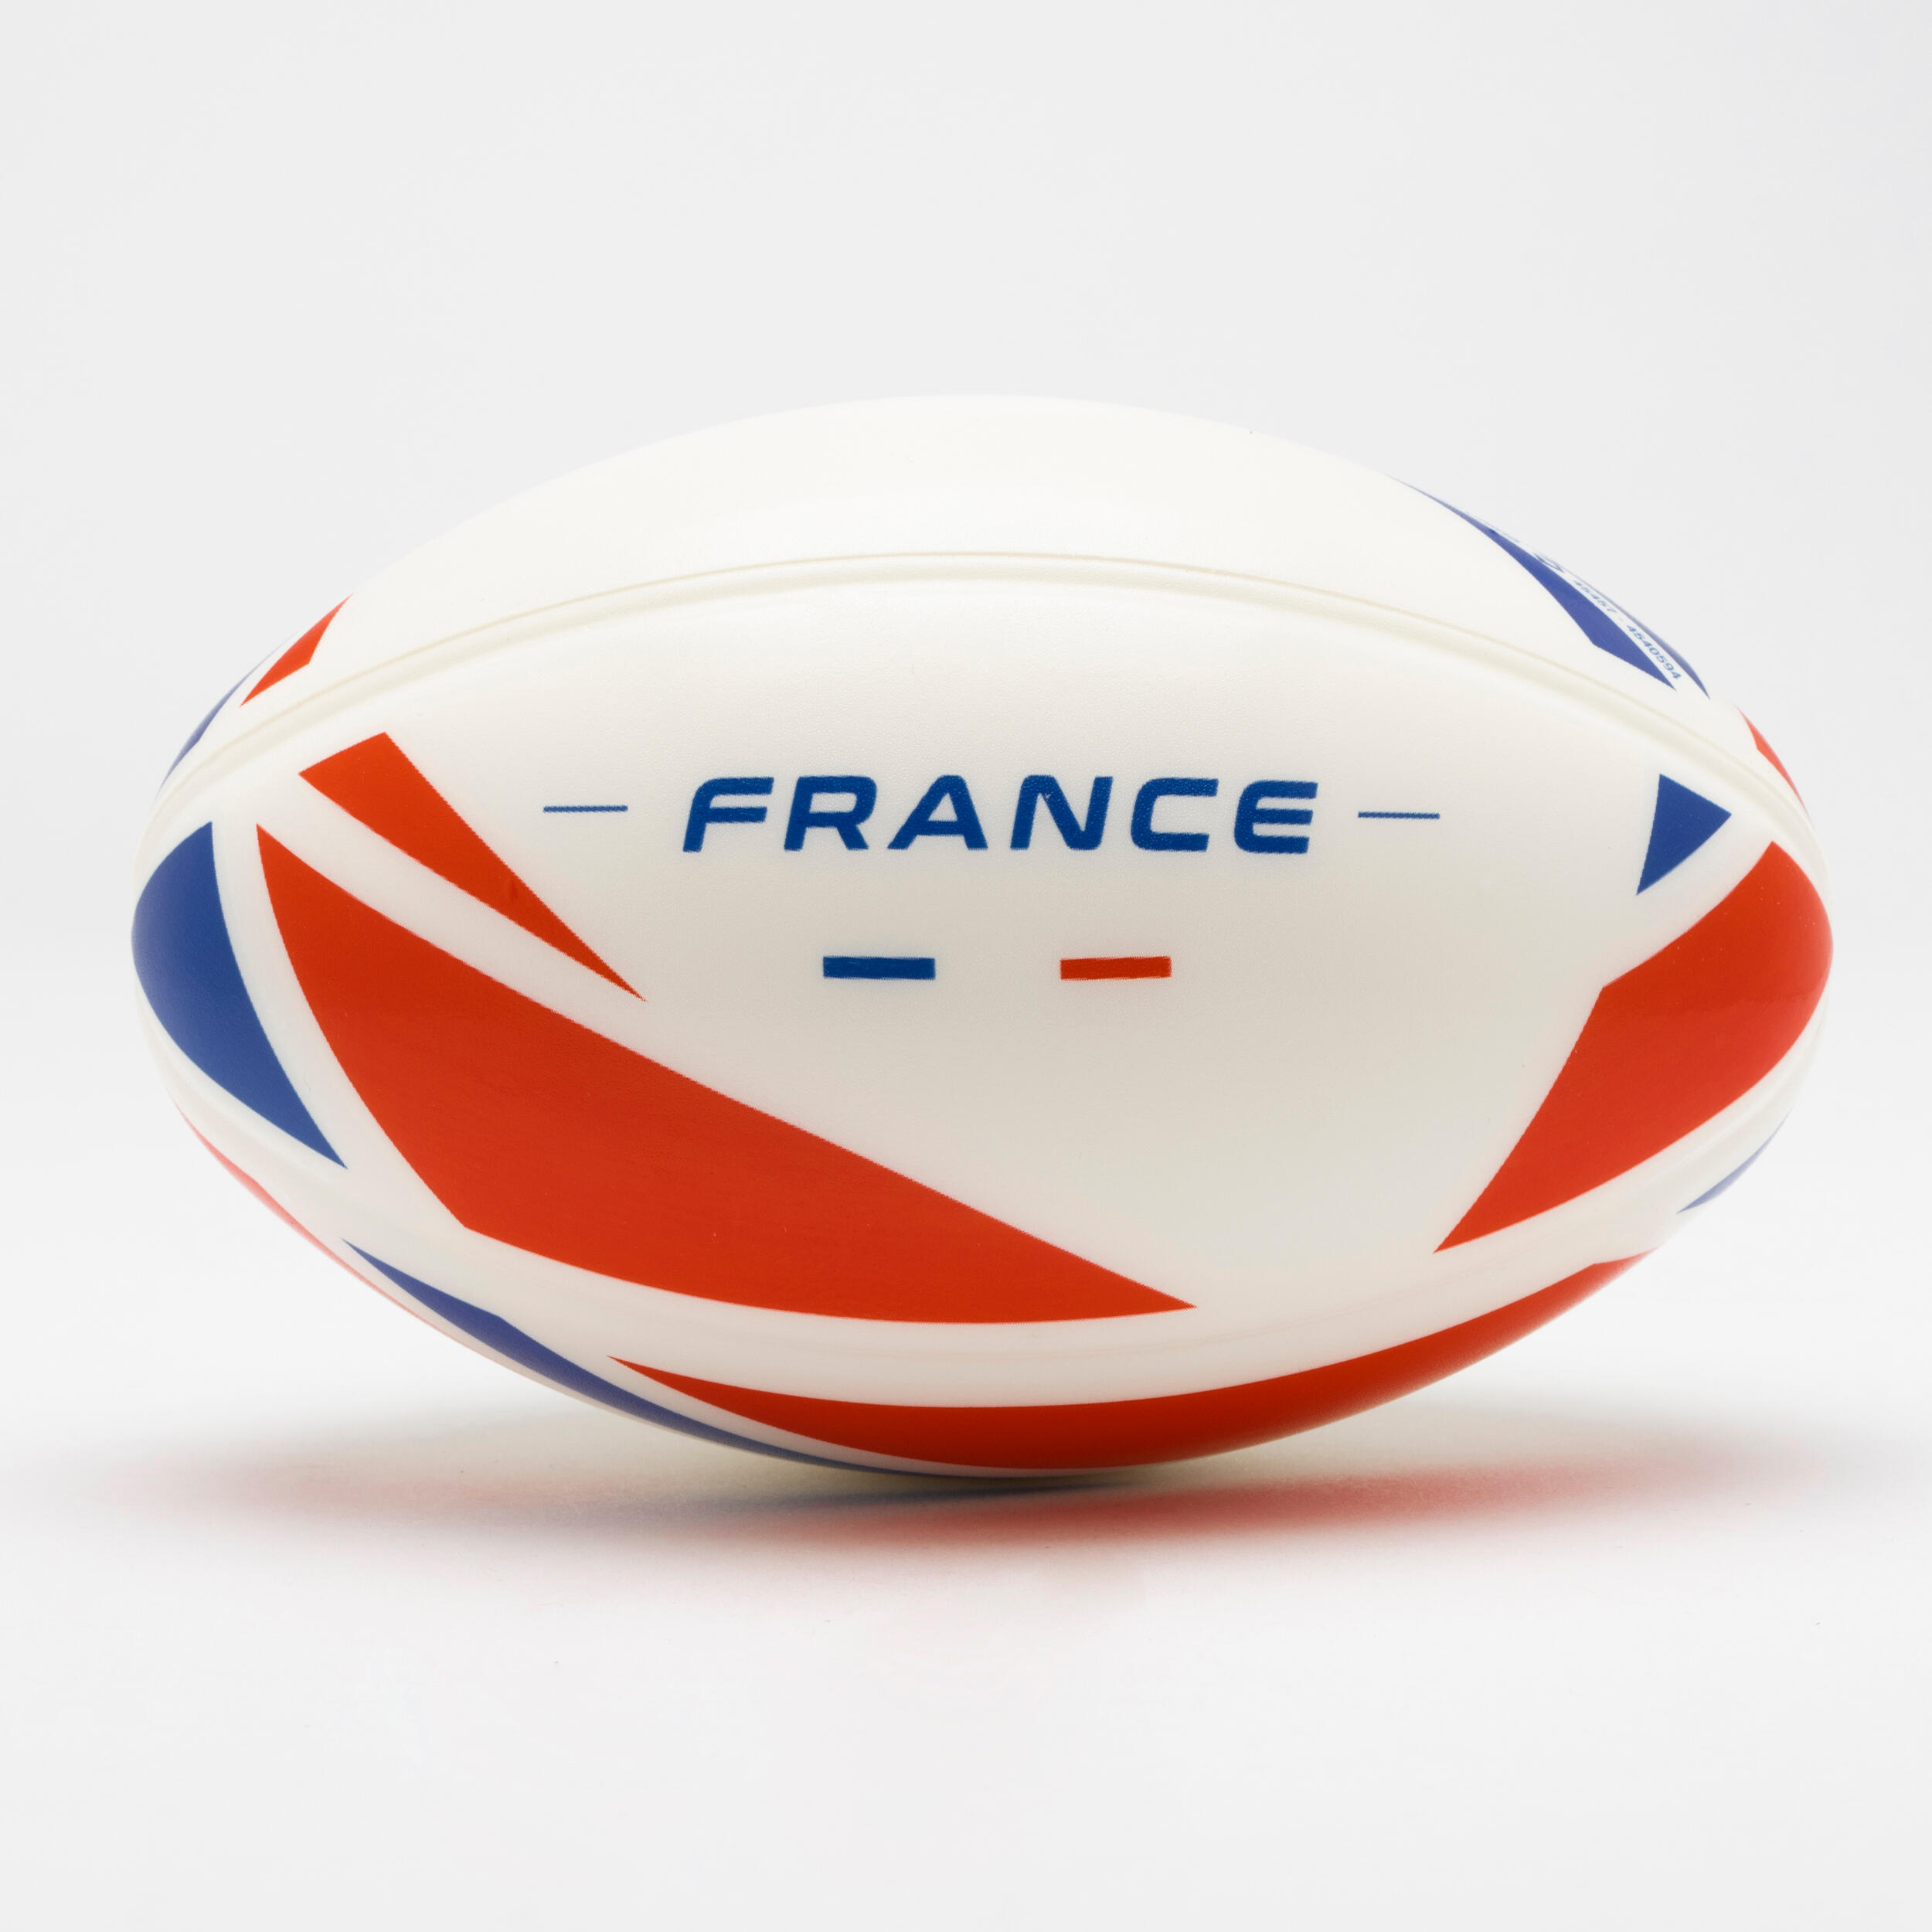 OFFLOAD Mini Foam Rugby Ball FR France Size 0